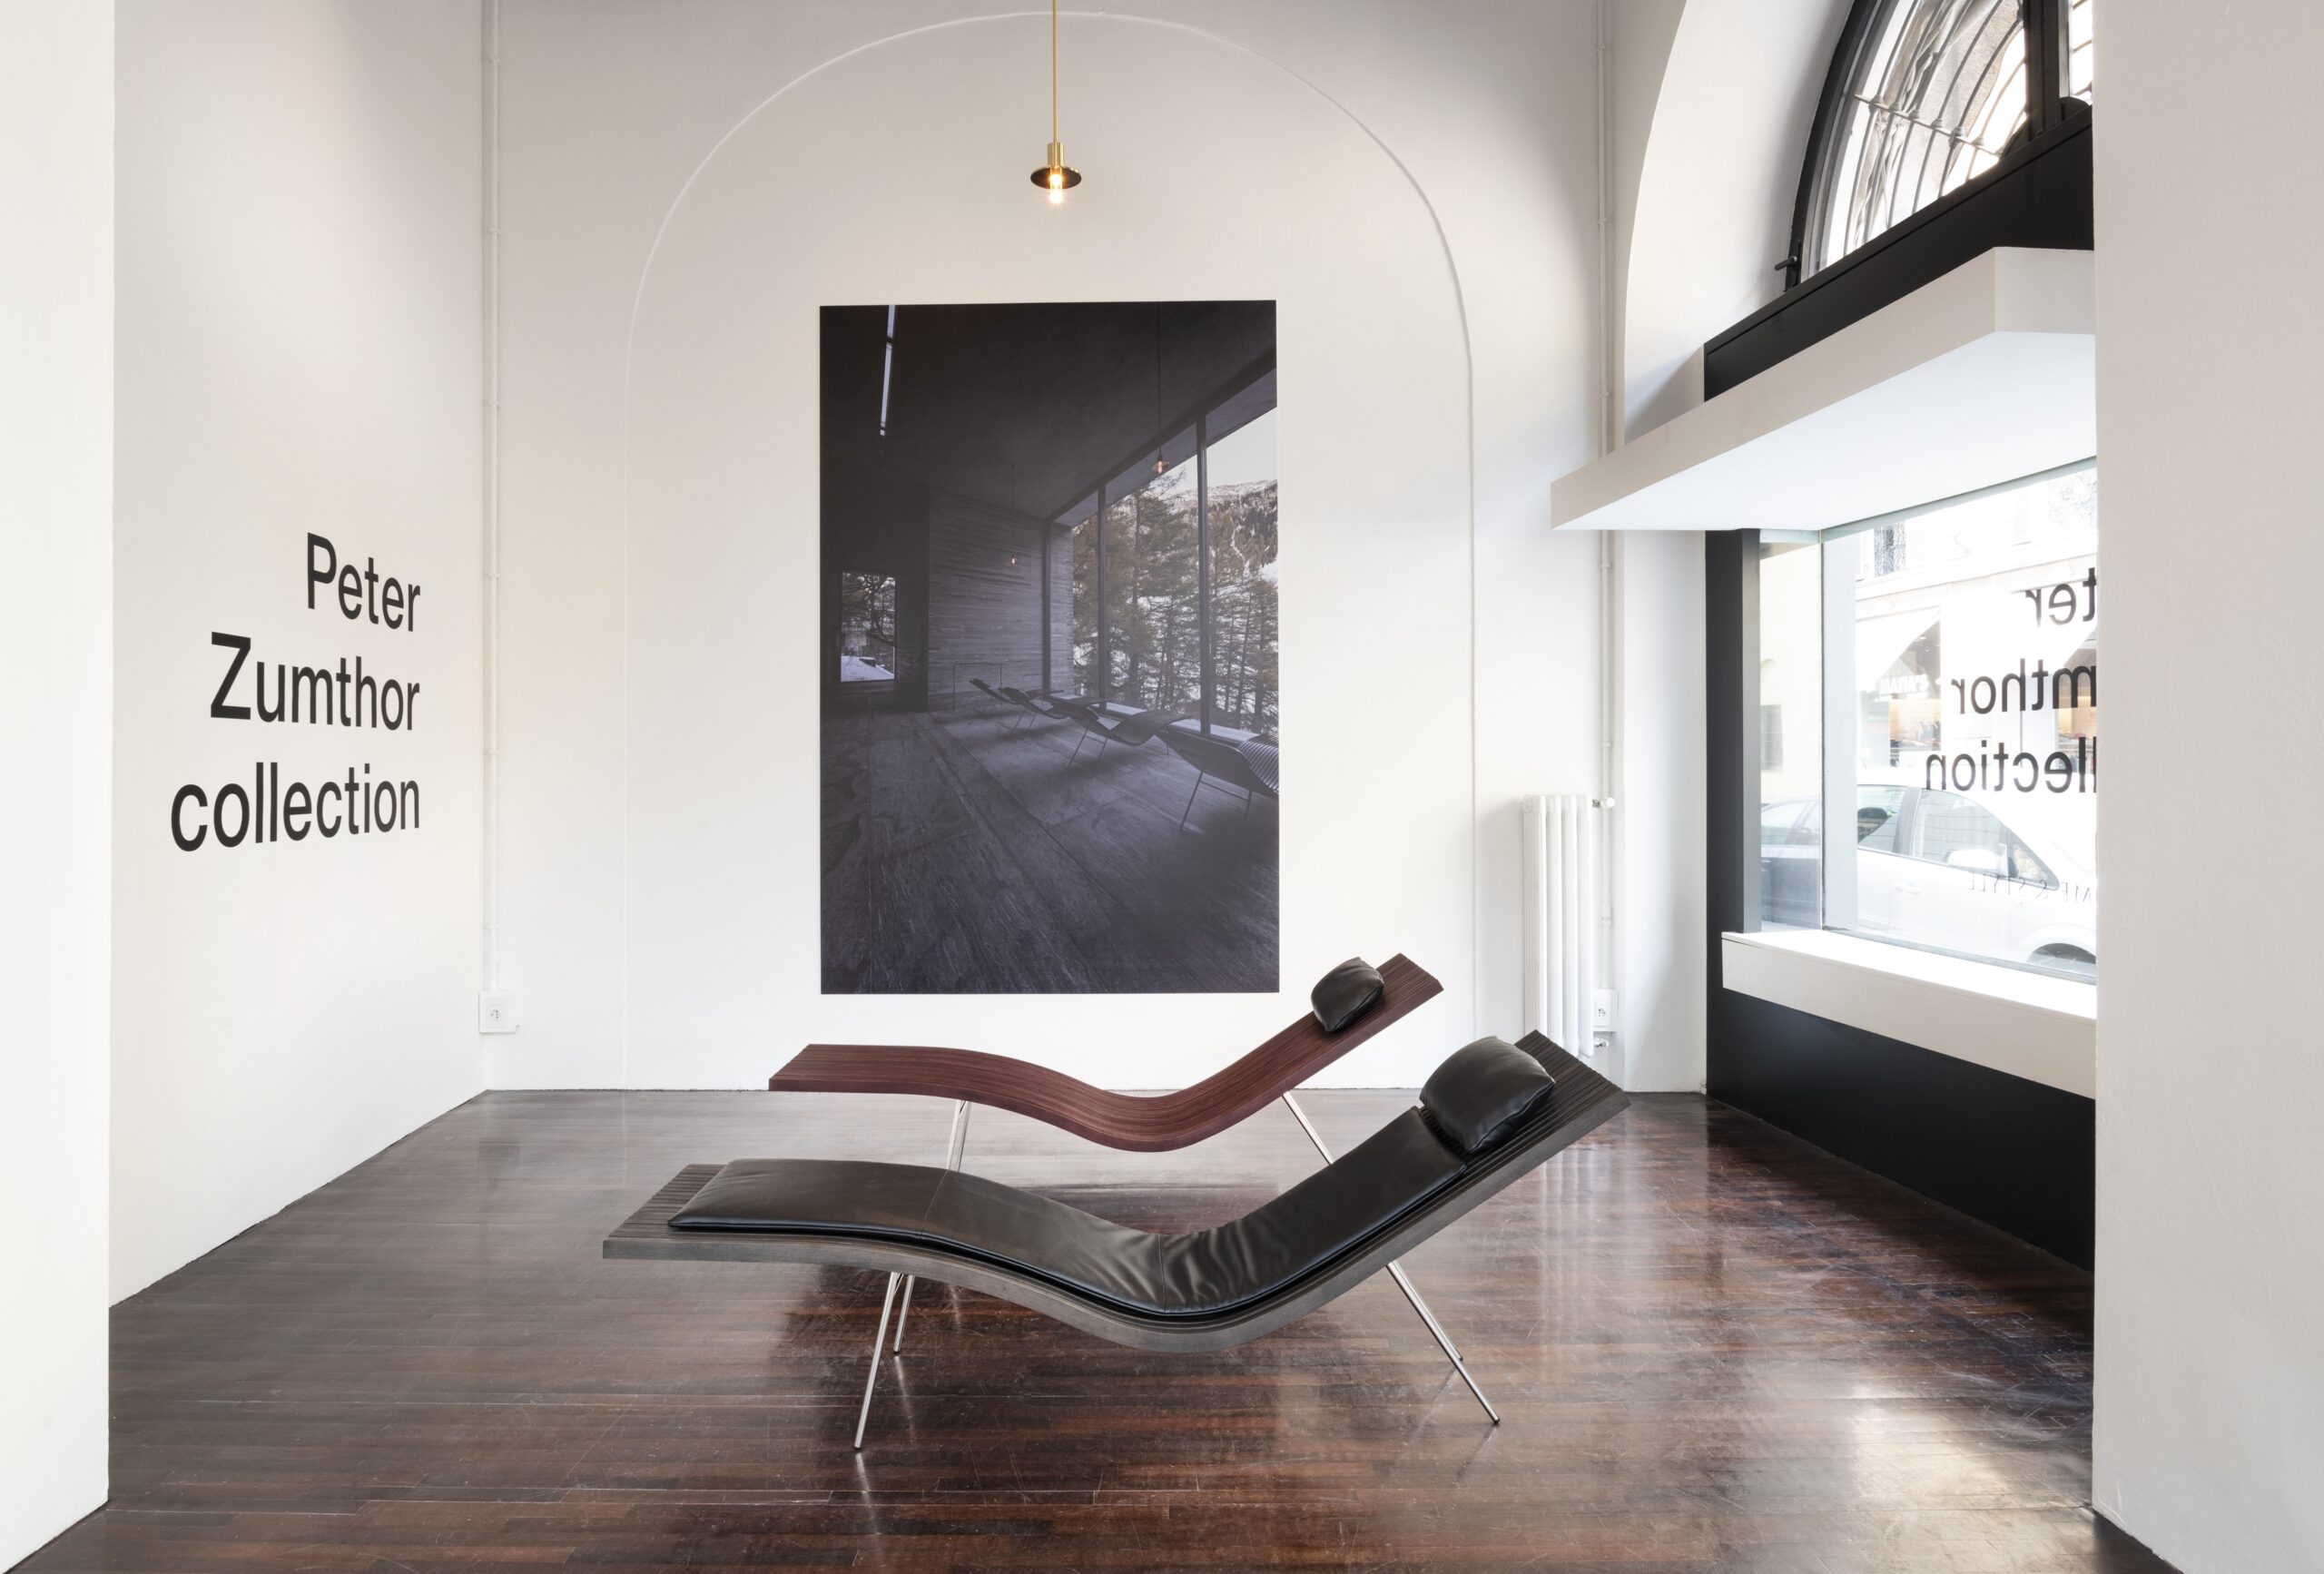 Image of two chaise lounge chairs in a showroom with a wall that reads "peter zumthor collection" 